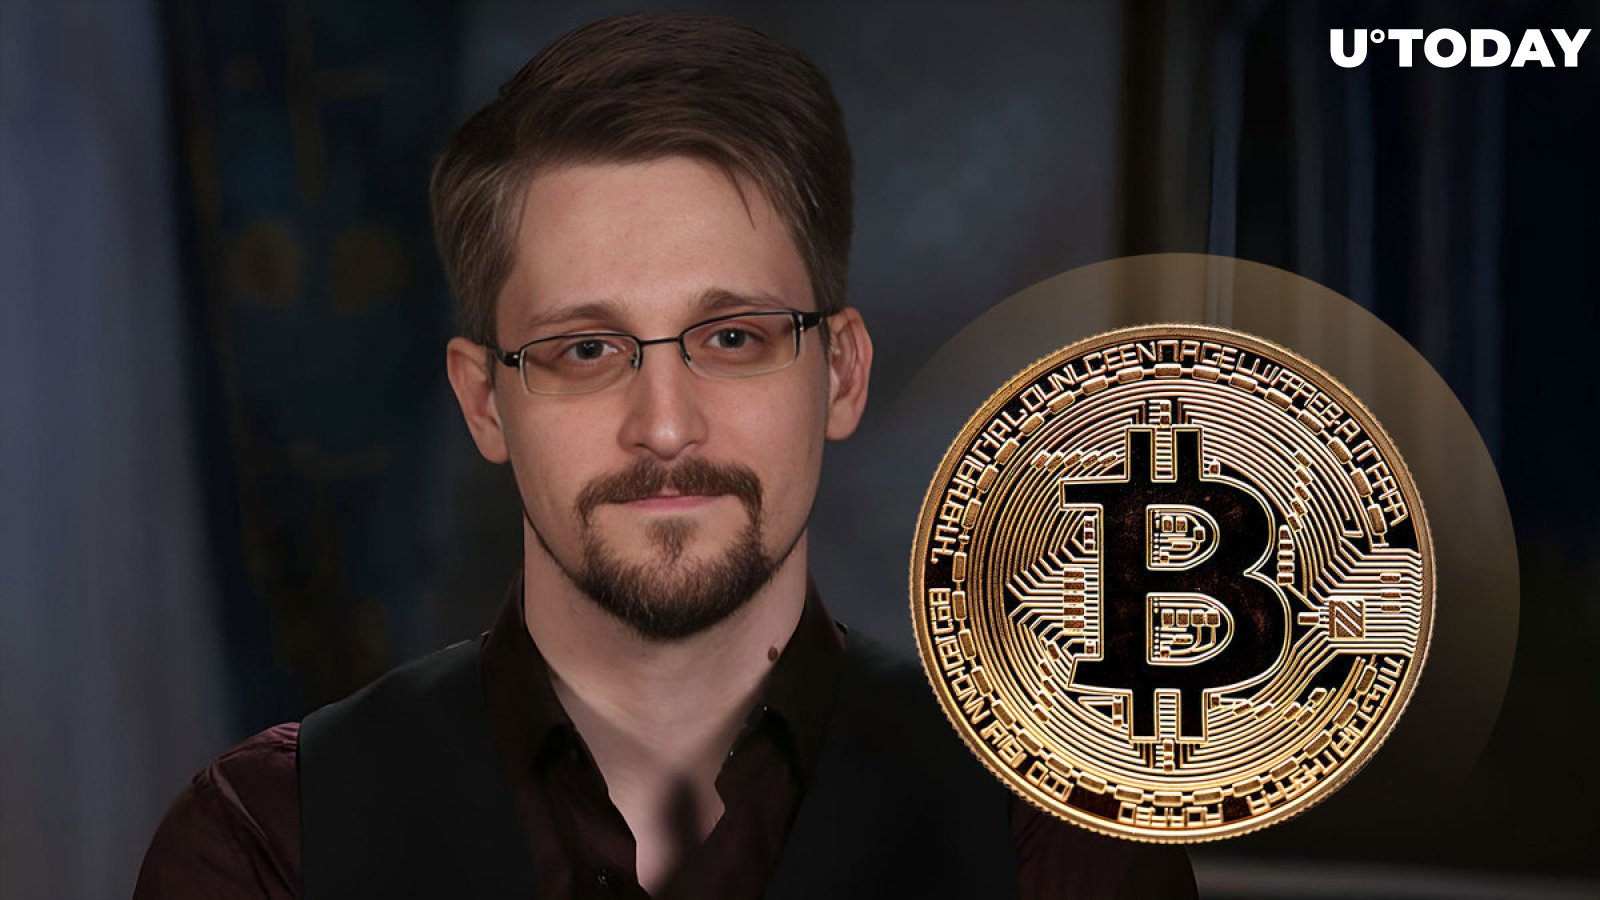 Edward Snowden Issues Crucial Bitcoin Warning: 'Clock Is Ticking'